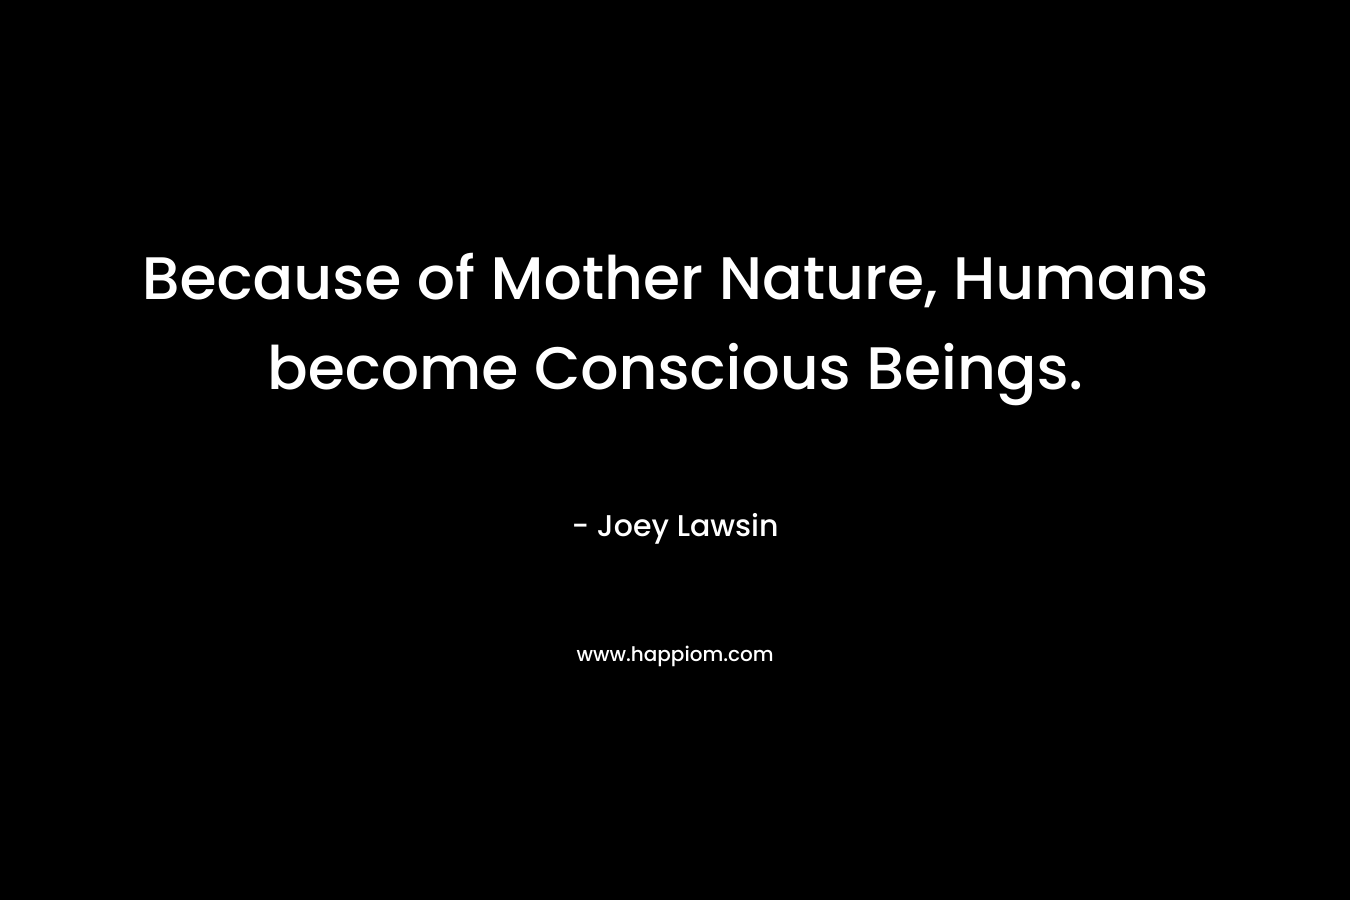 Because of Mother Nature, Humans become Conscious Beings.